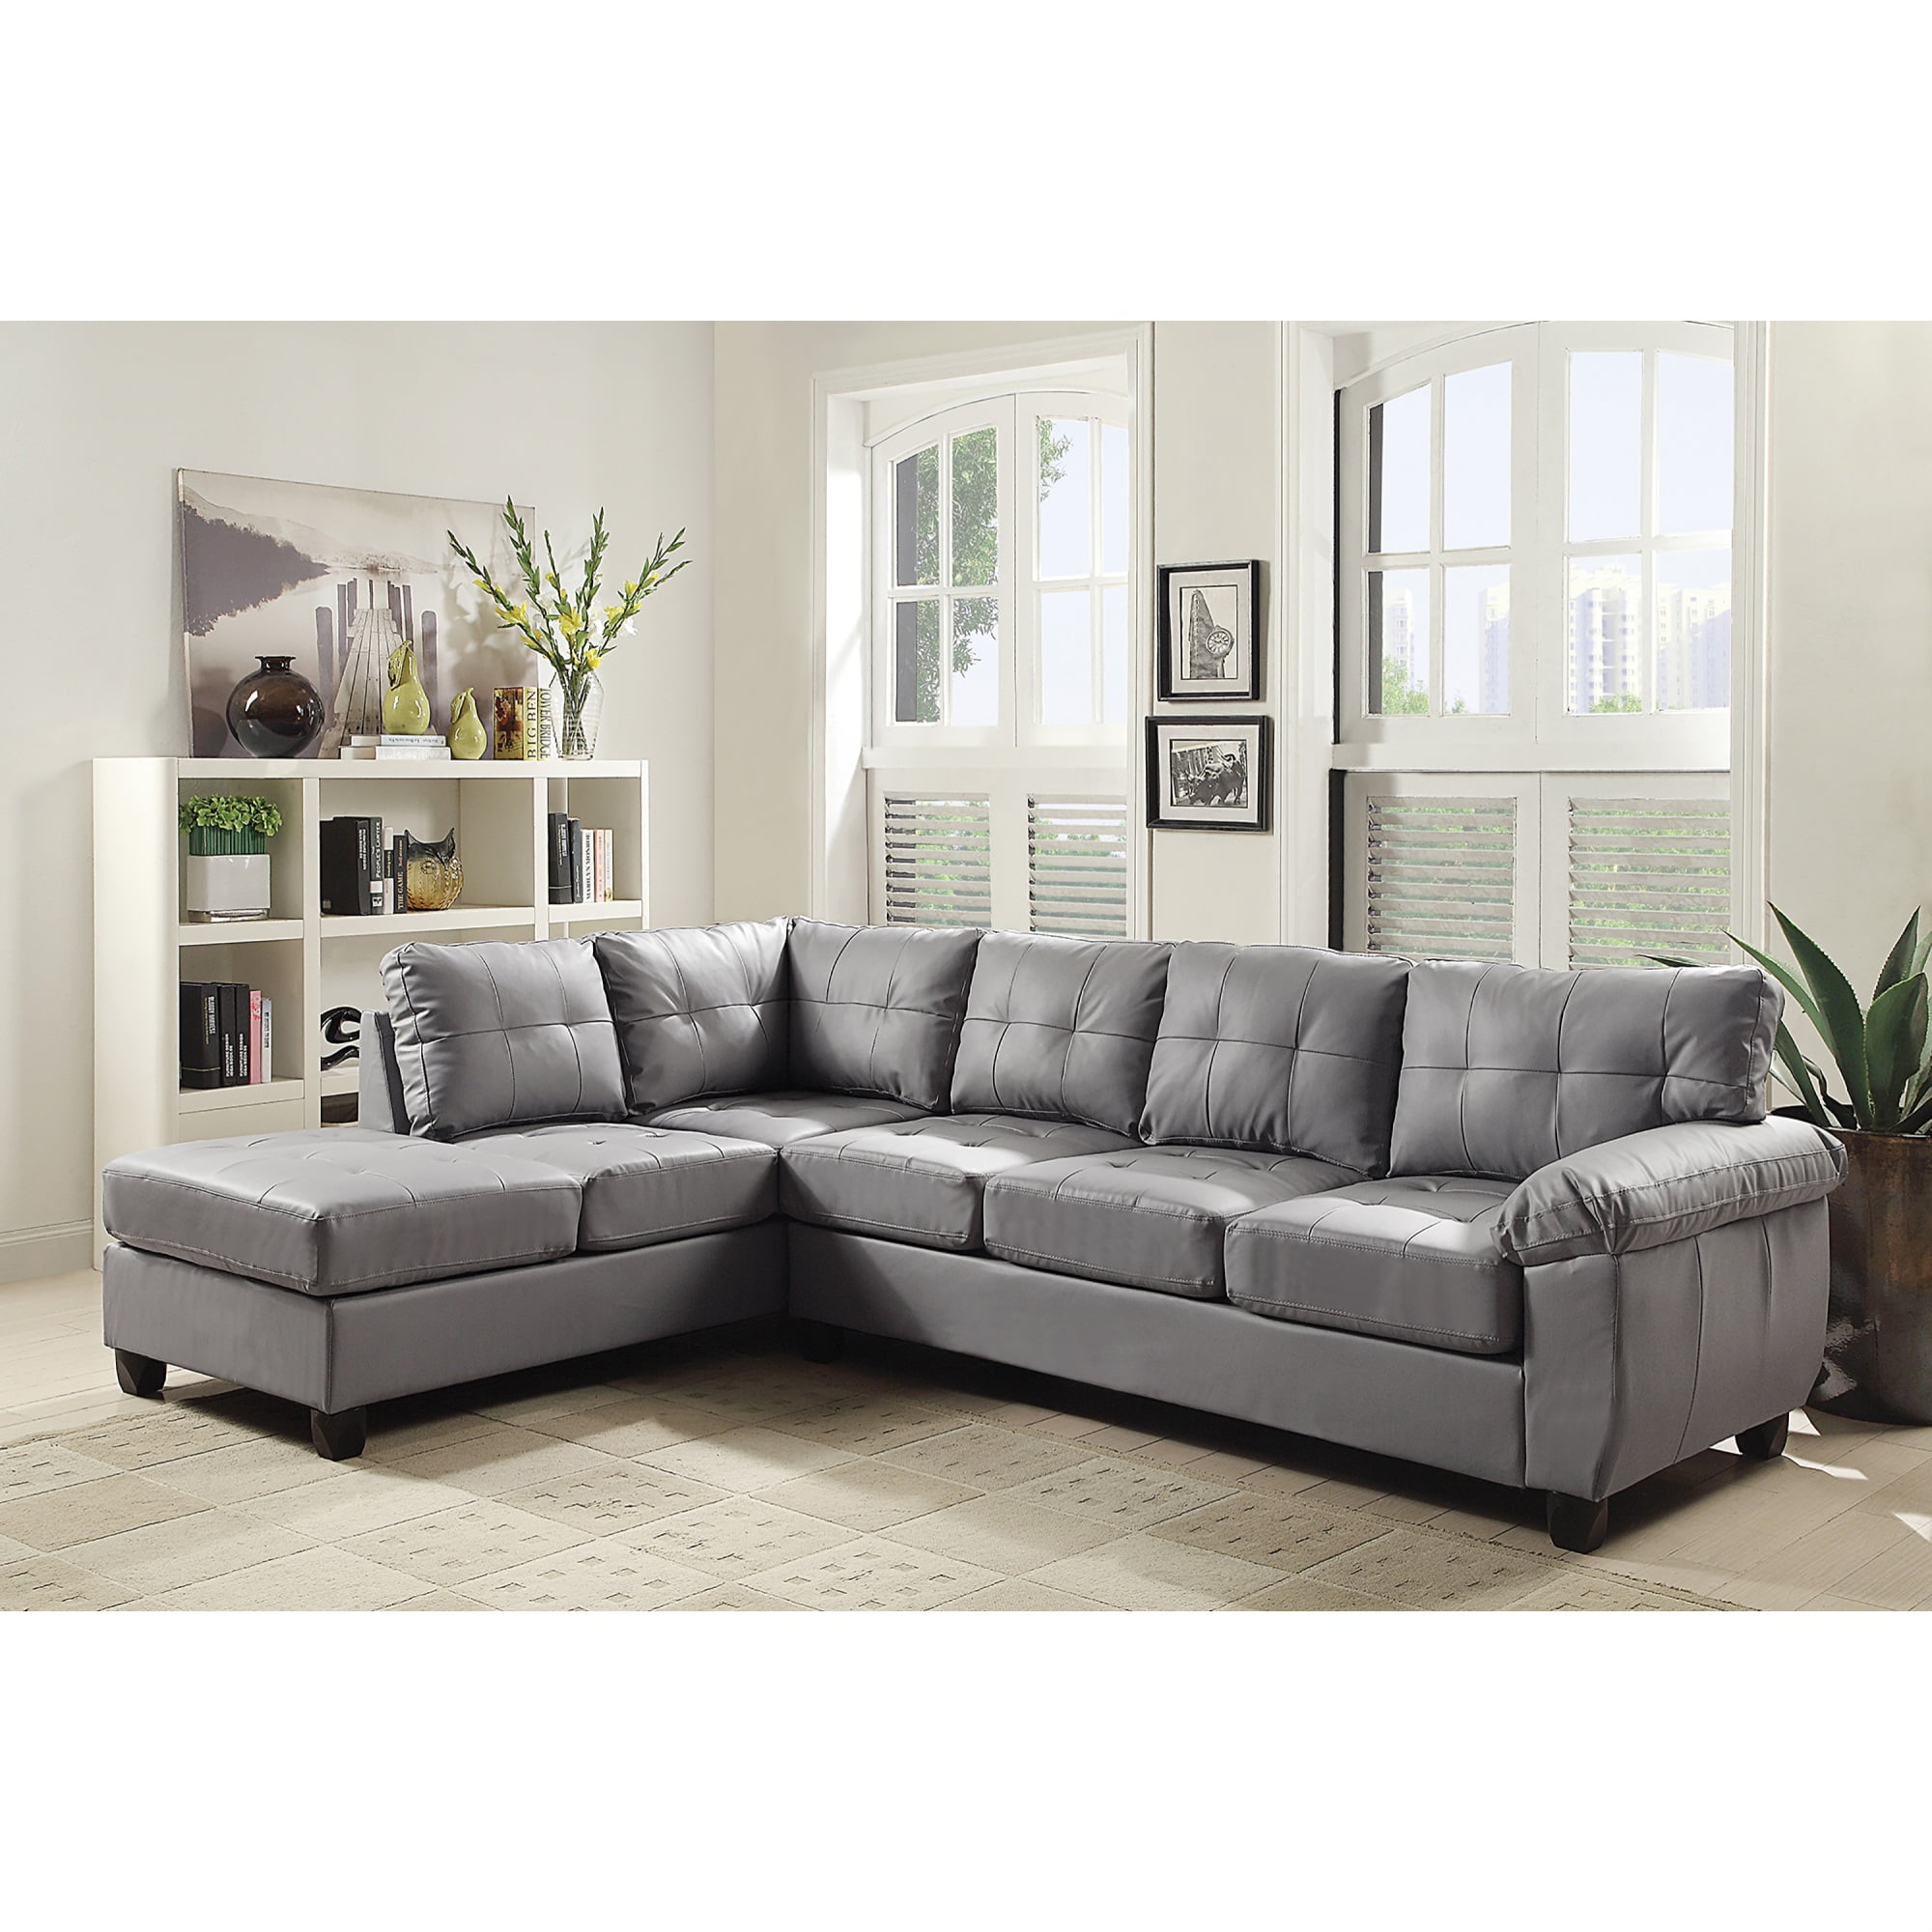 Passion Furniture Gallant 111 in. W 2-Piece Faux Leather and Microfiber L Shape Sectional Sofa in Mocha